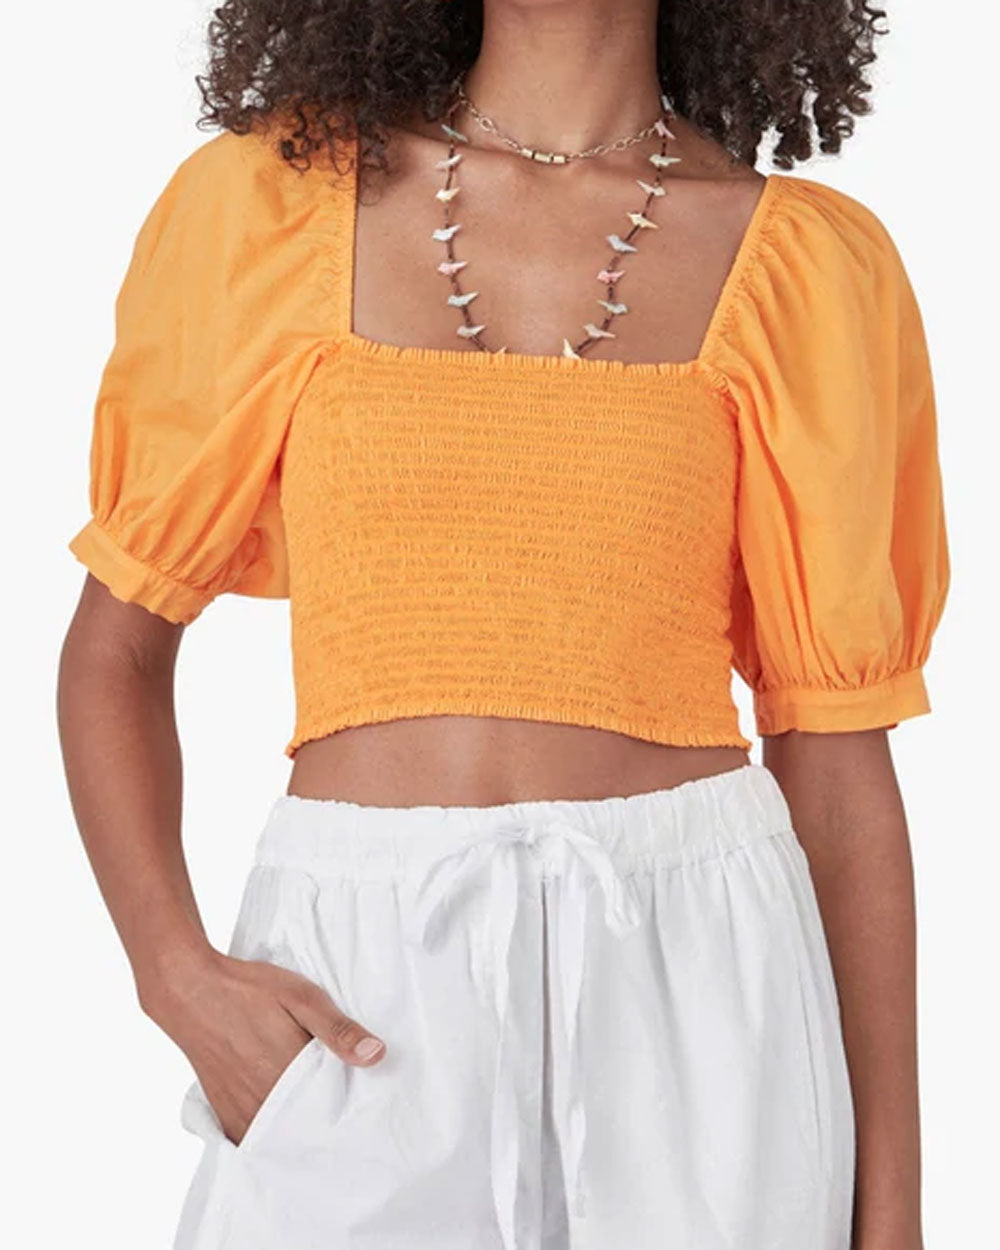 Apricot Issa Top